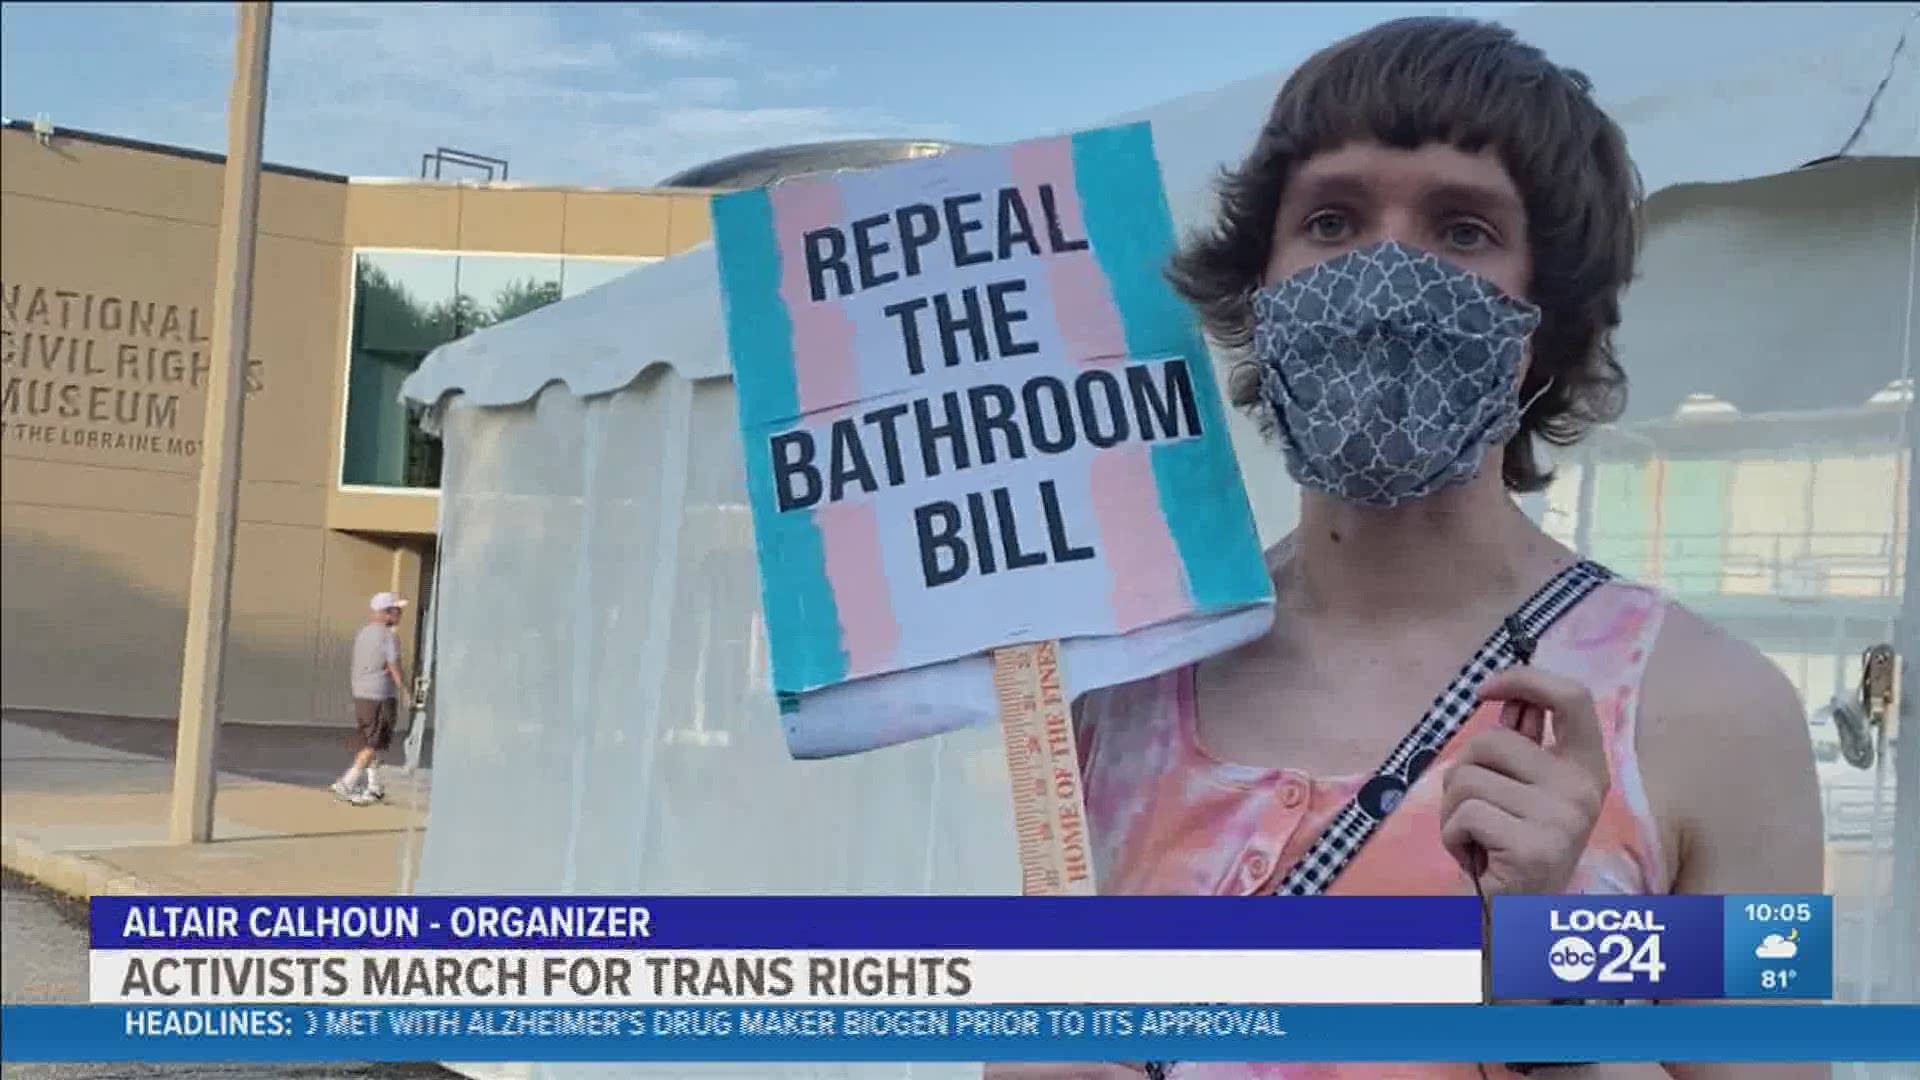 The Tennessee law that could risk the lives of transgender people was blocked by a federal judge.